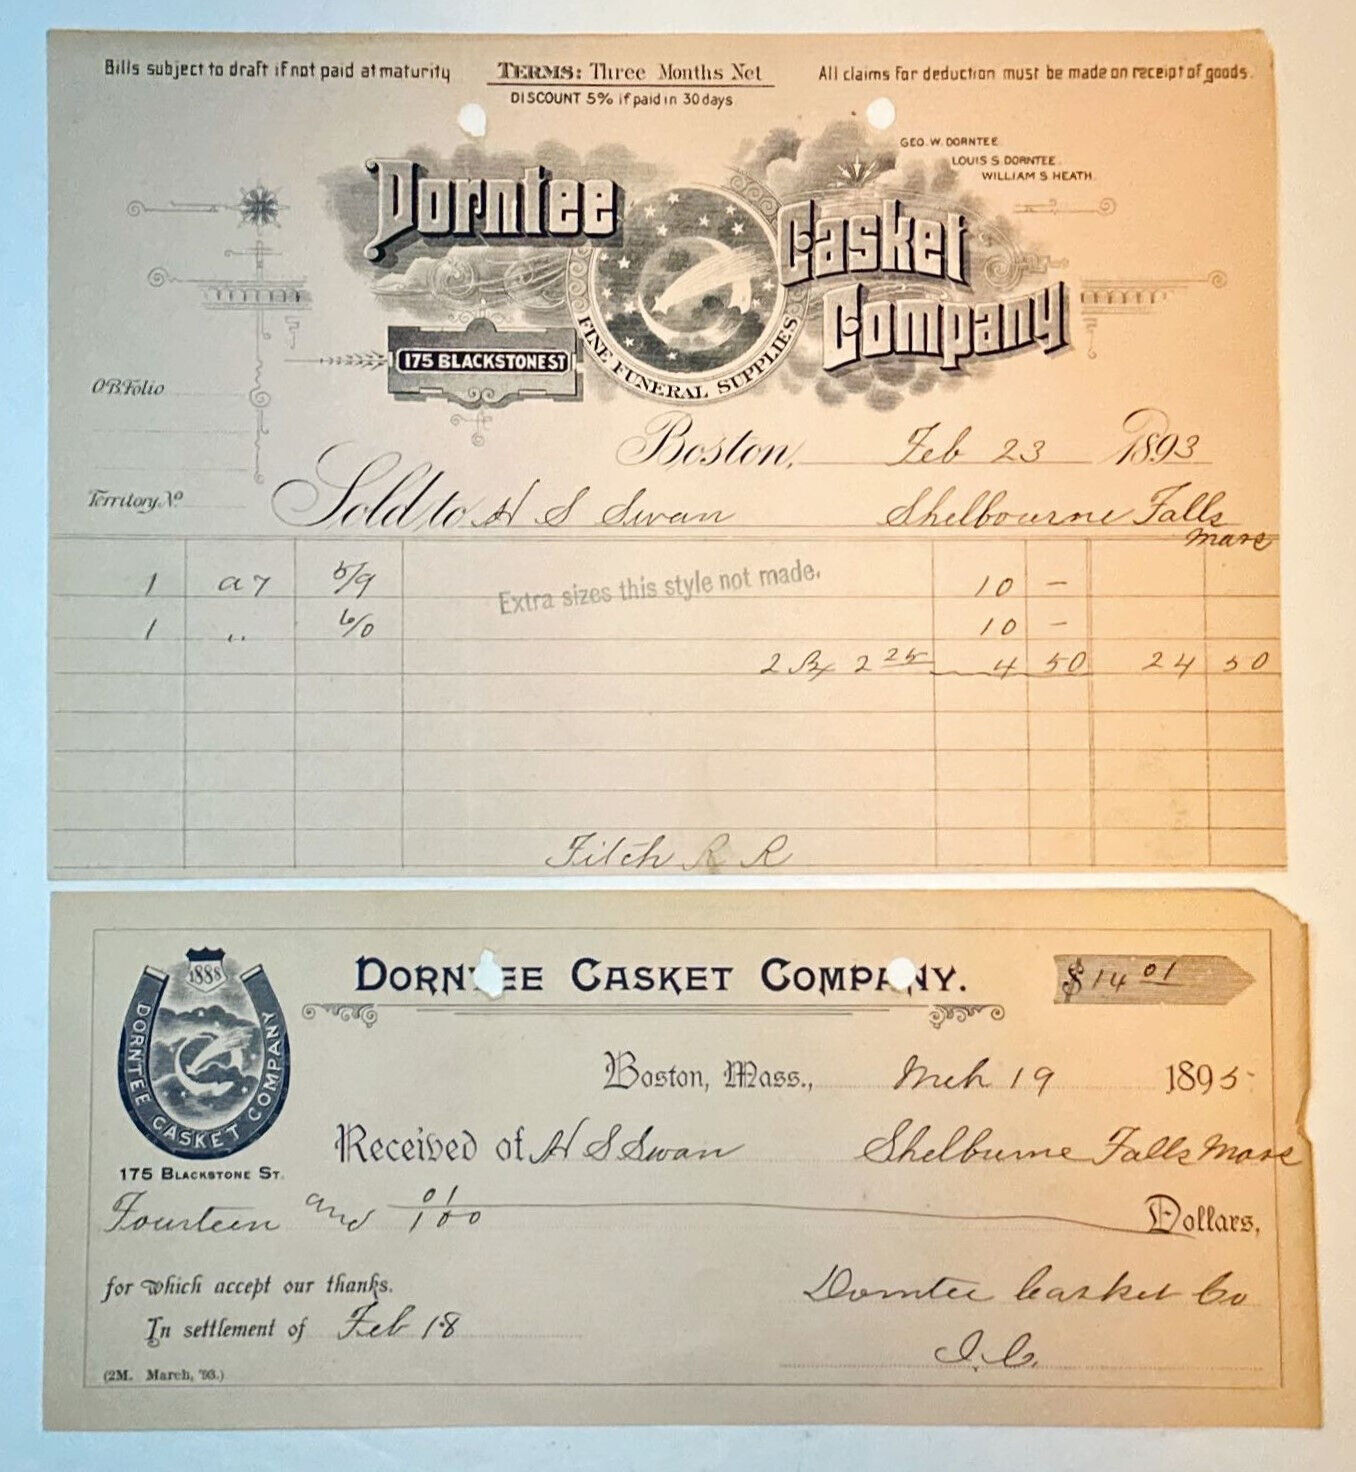 Lot of 2 Antique 1893 Dorntee Casket Co. Illustrated Invoice And Check Boston